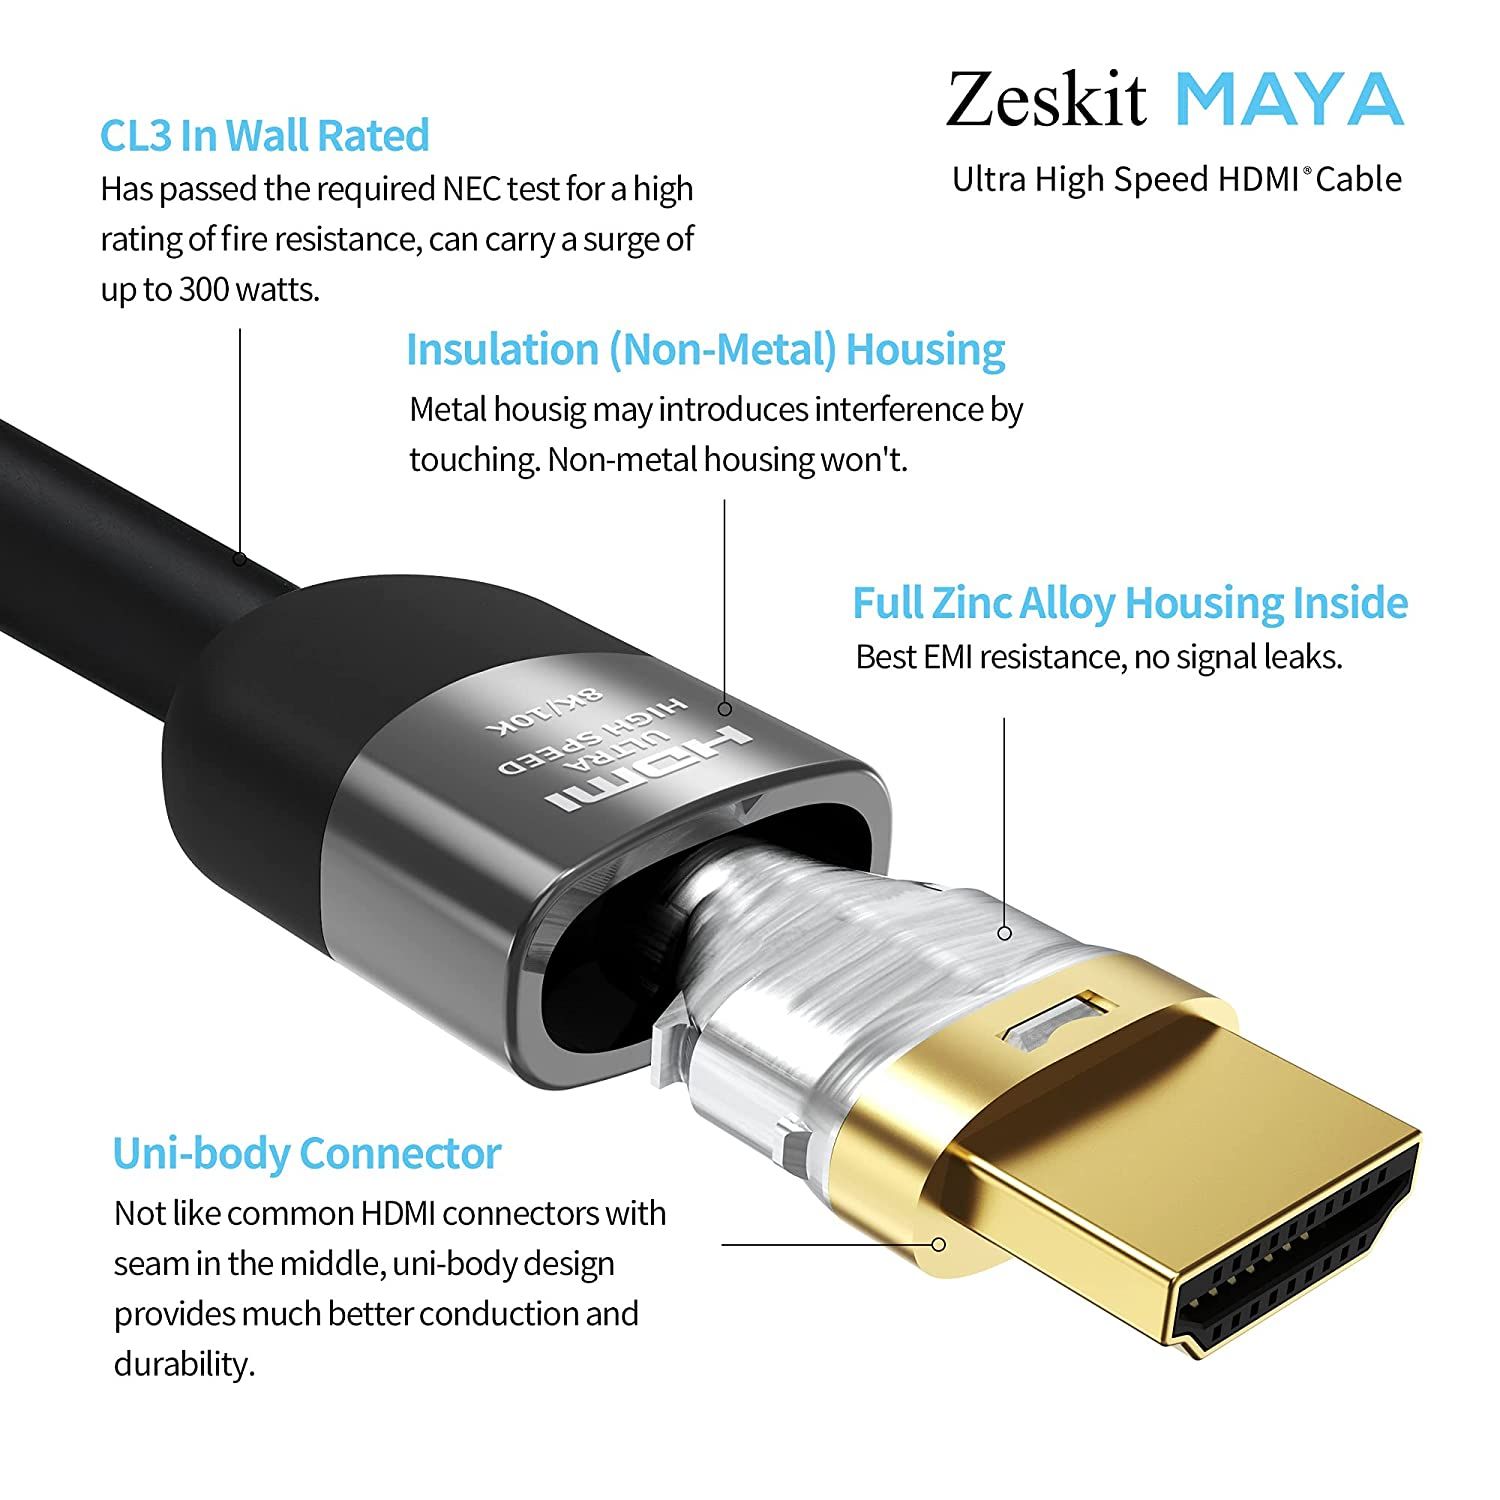 Zeskit MAYA Ultra High Speed HDMI Cable CL3 In Wall Rated Bulid Quality